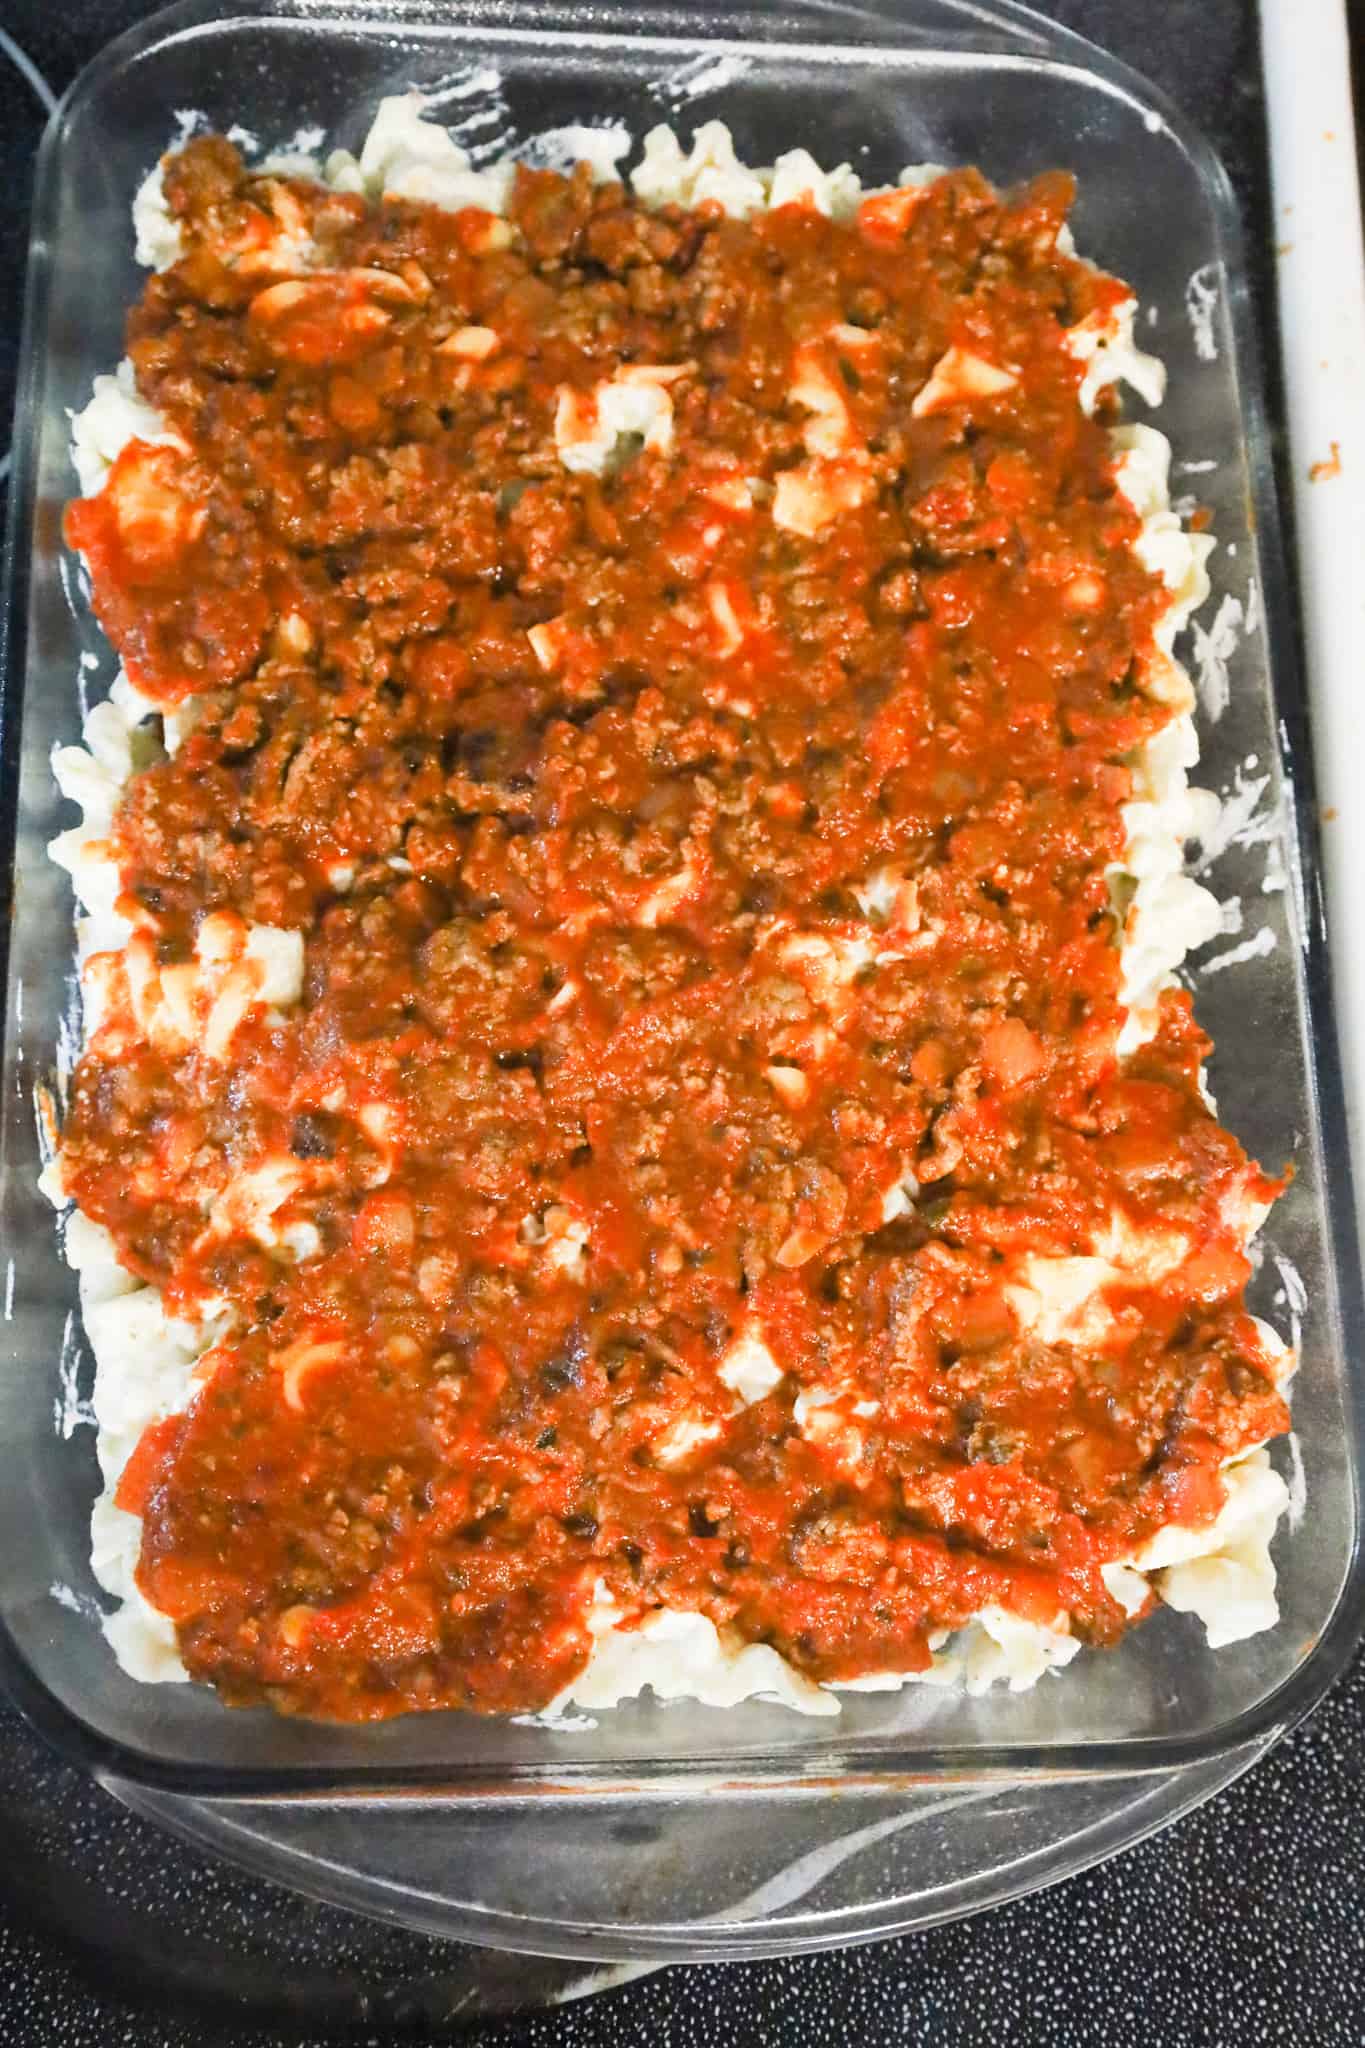 ground beef and marinara mixture on top of noodles in a baking dish